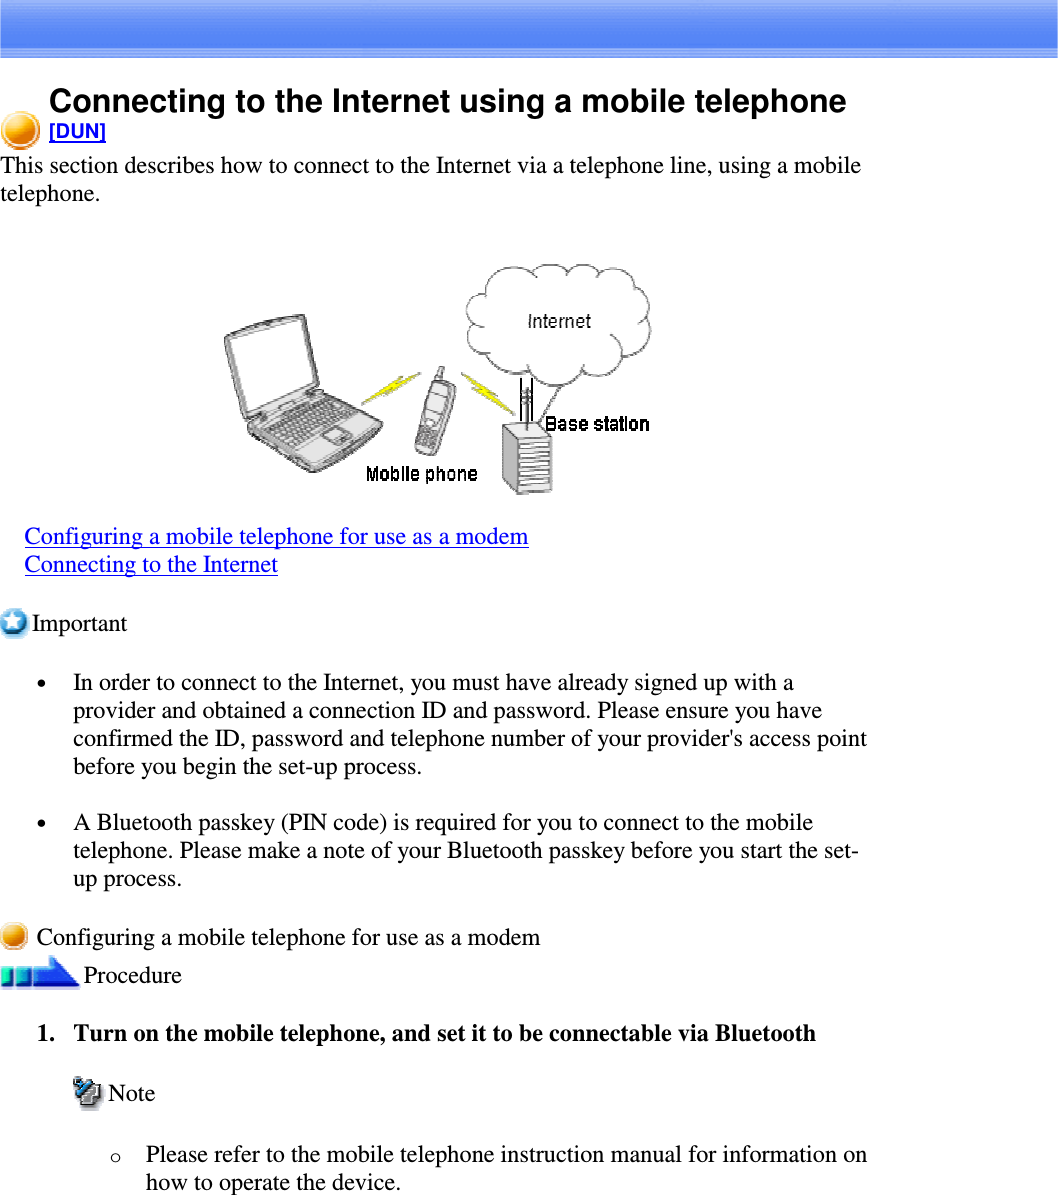 Connecting to the Internet using a mobile telephone[DUN]This section describes how to connect to the Internet via a telephone line, using a mobiletelephone.Configuring a mobile telephone for use as a modemConnecting to the InternetImportant•  In order to connect to the Internet, you must have already signed up with aprovider and obtained a connection ID and password. Please ensure you haveconfirmed the ID, password and telephone number of your provider&apos;s access pointbefore you begin the set-up process.•  A Bluetooth passkey (PIN code) is required for you to connect to the mobiletelephone. Please make a note of your Bluetooth passkey before you start the set-up process.Configuring a mobile telephone for use as a modemProcedure1. Turn on the mobile telephone, and set it to be connectable via BluetoothNoteoPlease refer to the mobile telephone instruction manual for information onhow to operate the device.